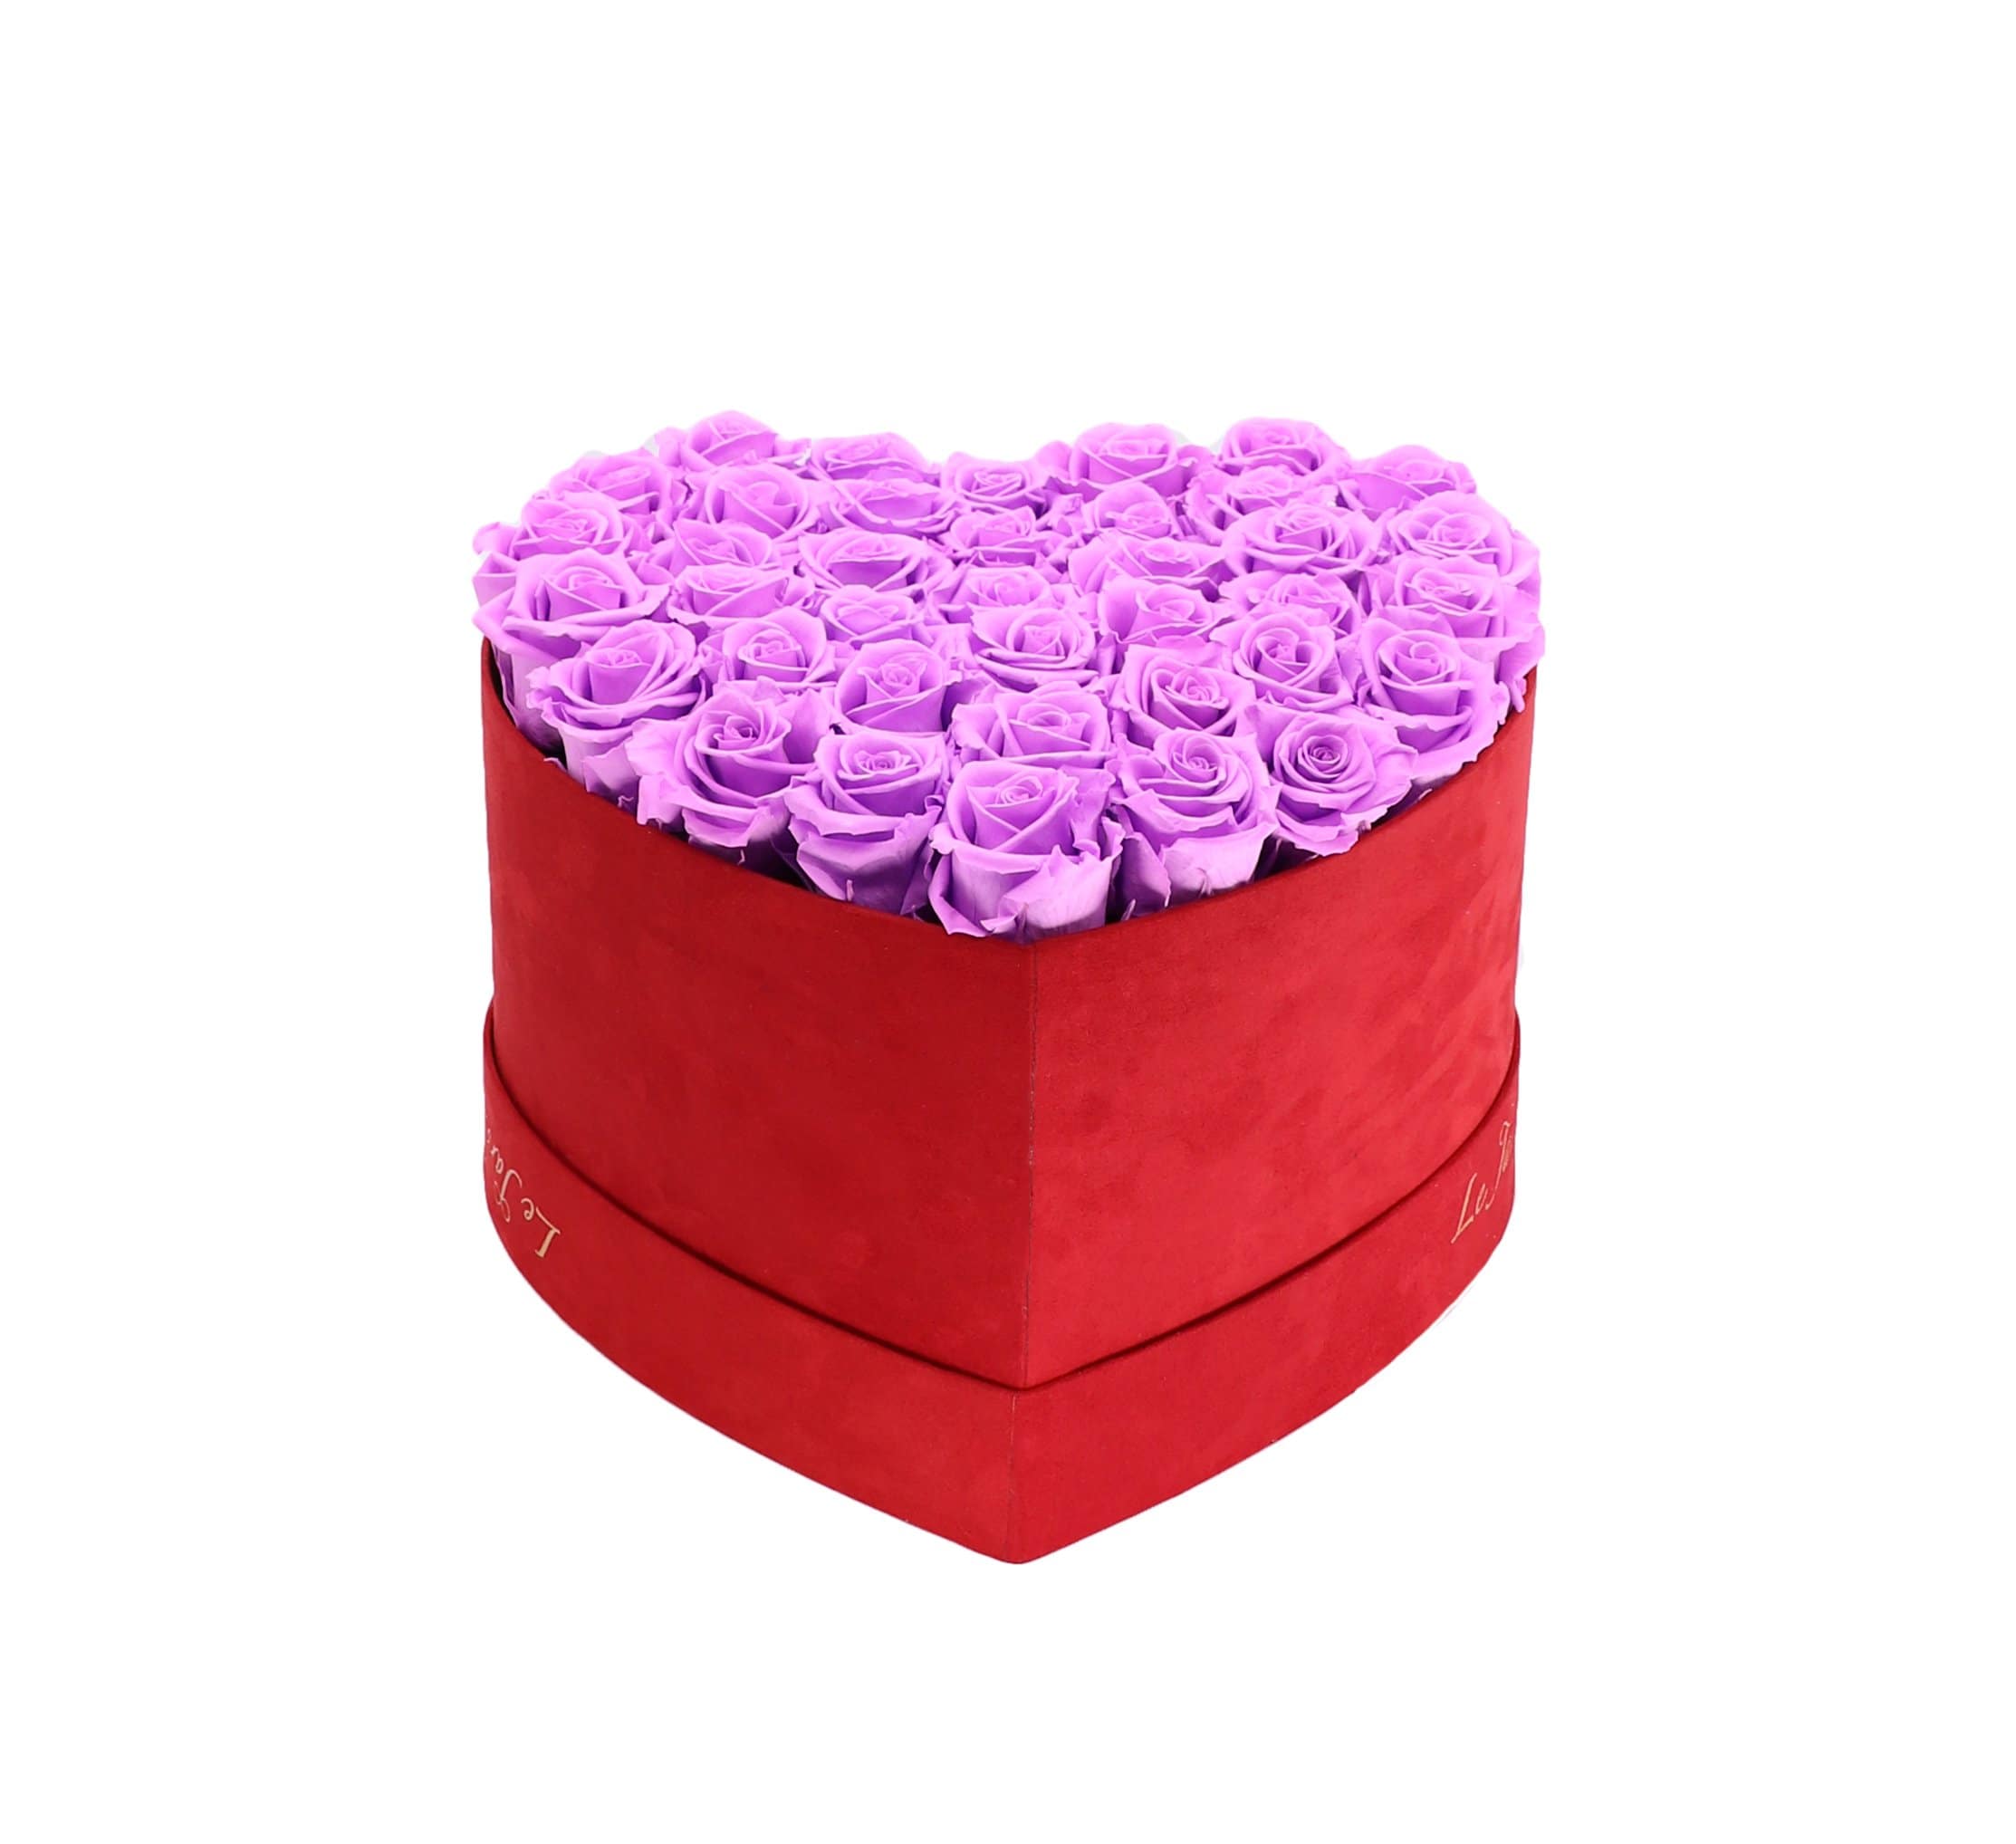 Lilac Preserved Roses in A Heart Shaped Box- Small Heart Luxury Red Suede Box - Le Jardin Infini Roses in a Box